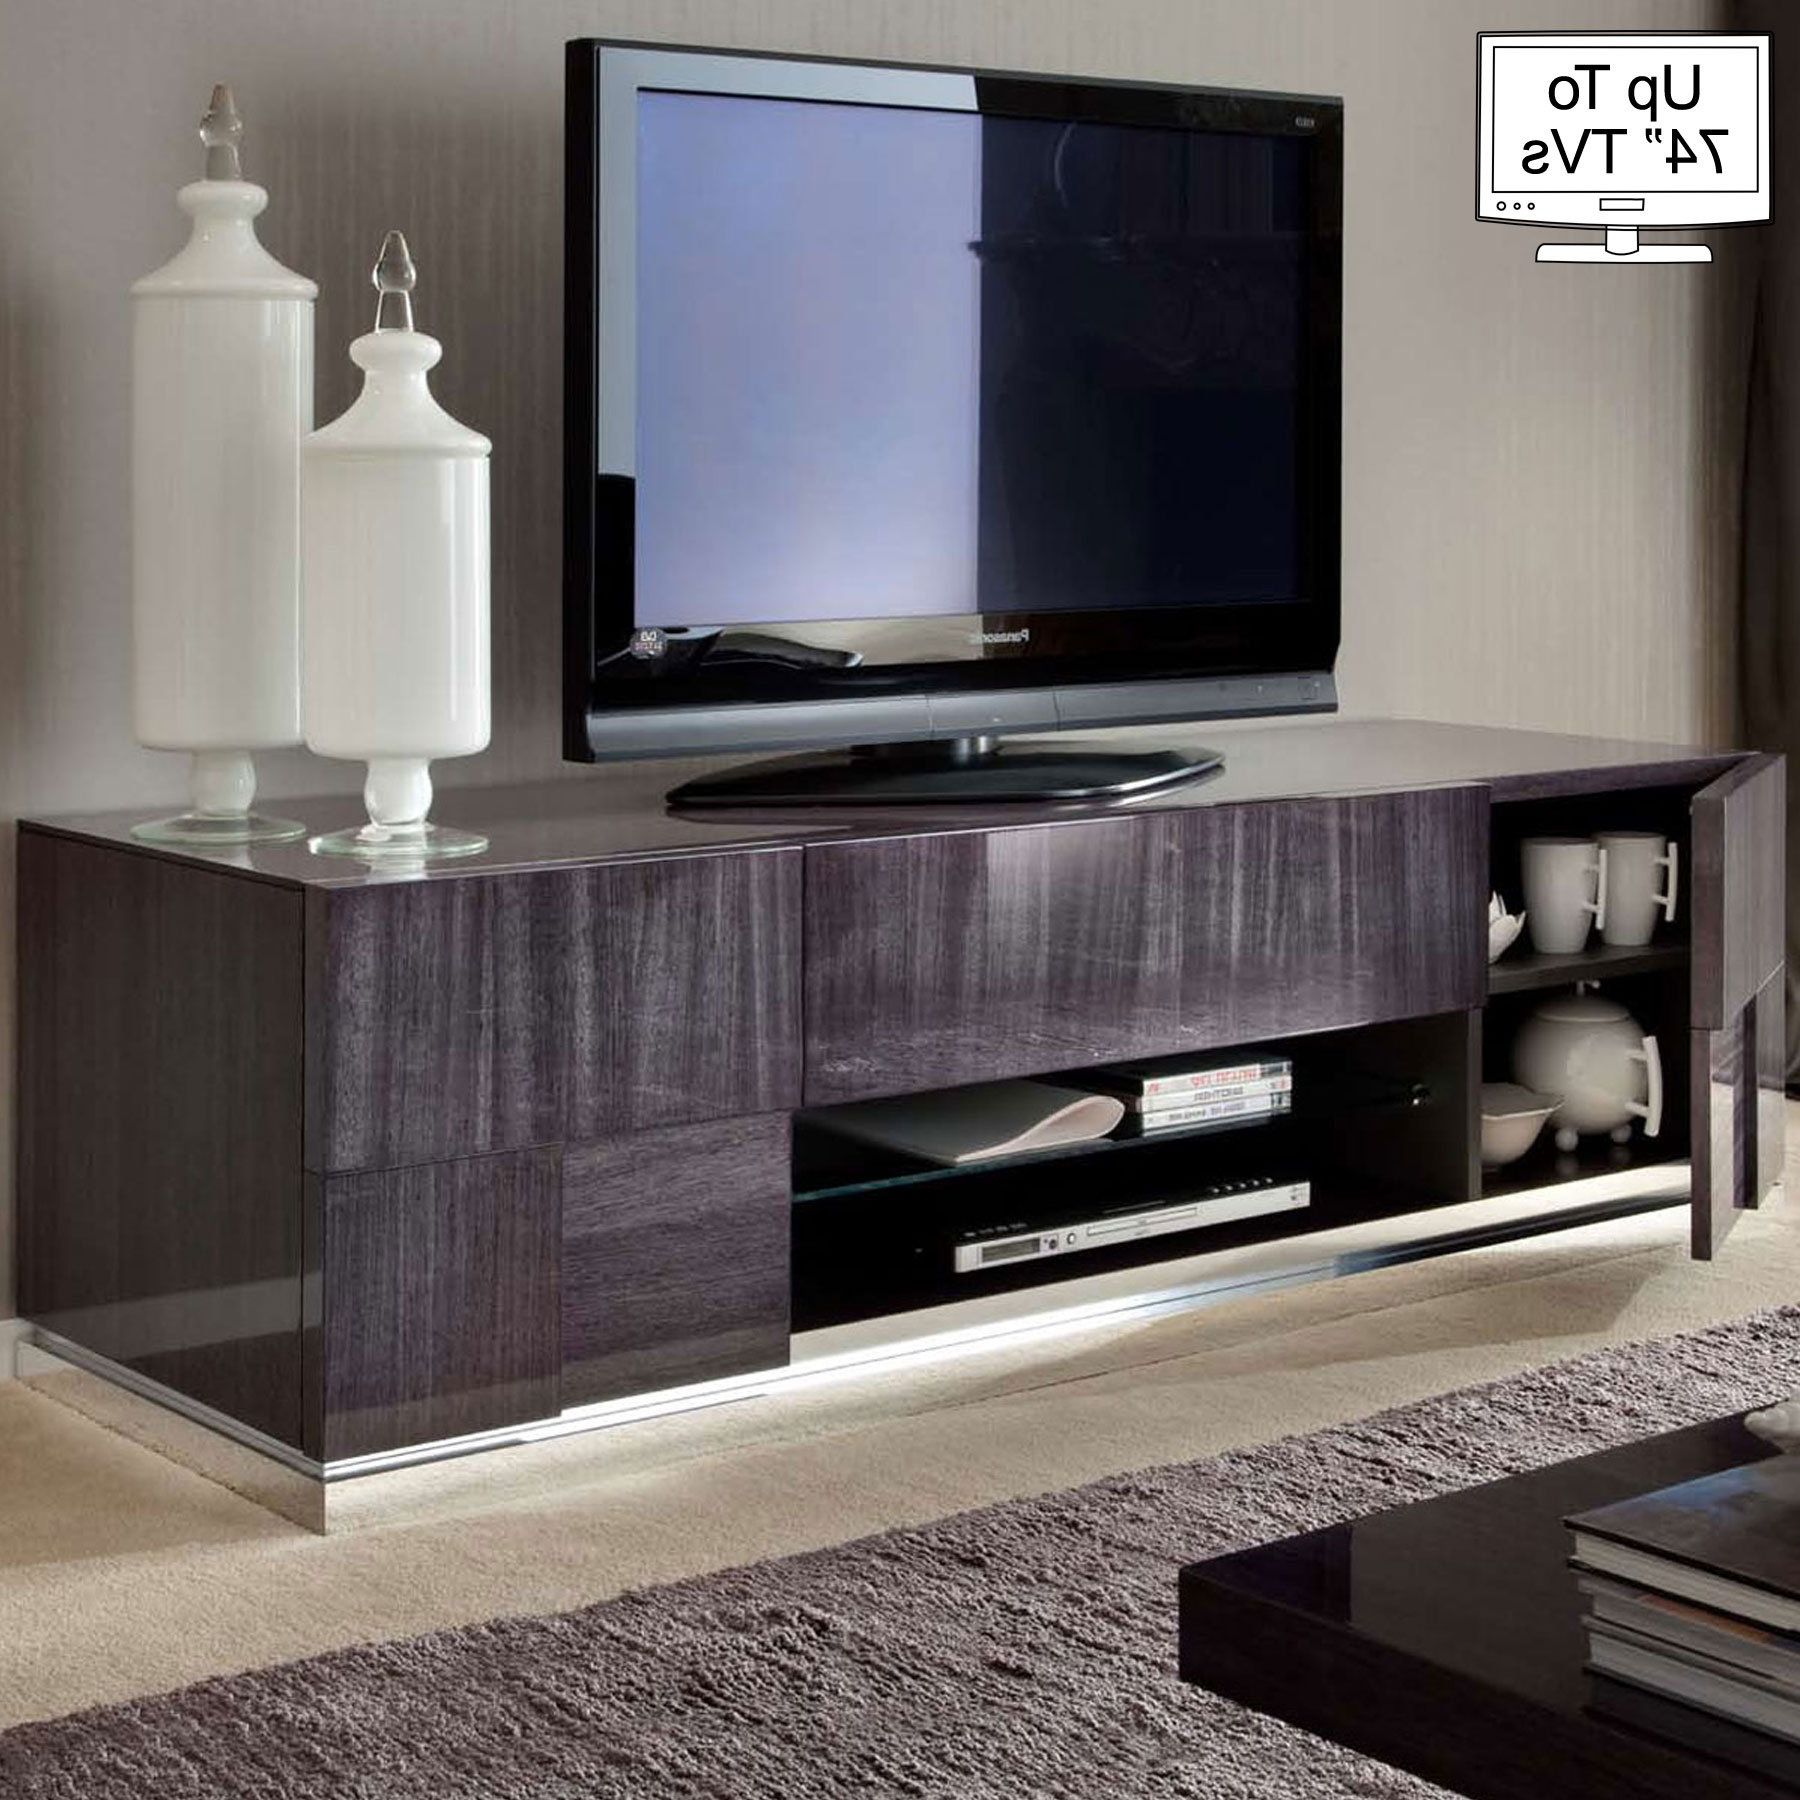 High Gloss Tv Stands Intended For Popular Monza High Gloss Tv Stand For Up To 74" Tvs (View 5 of 10)